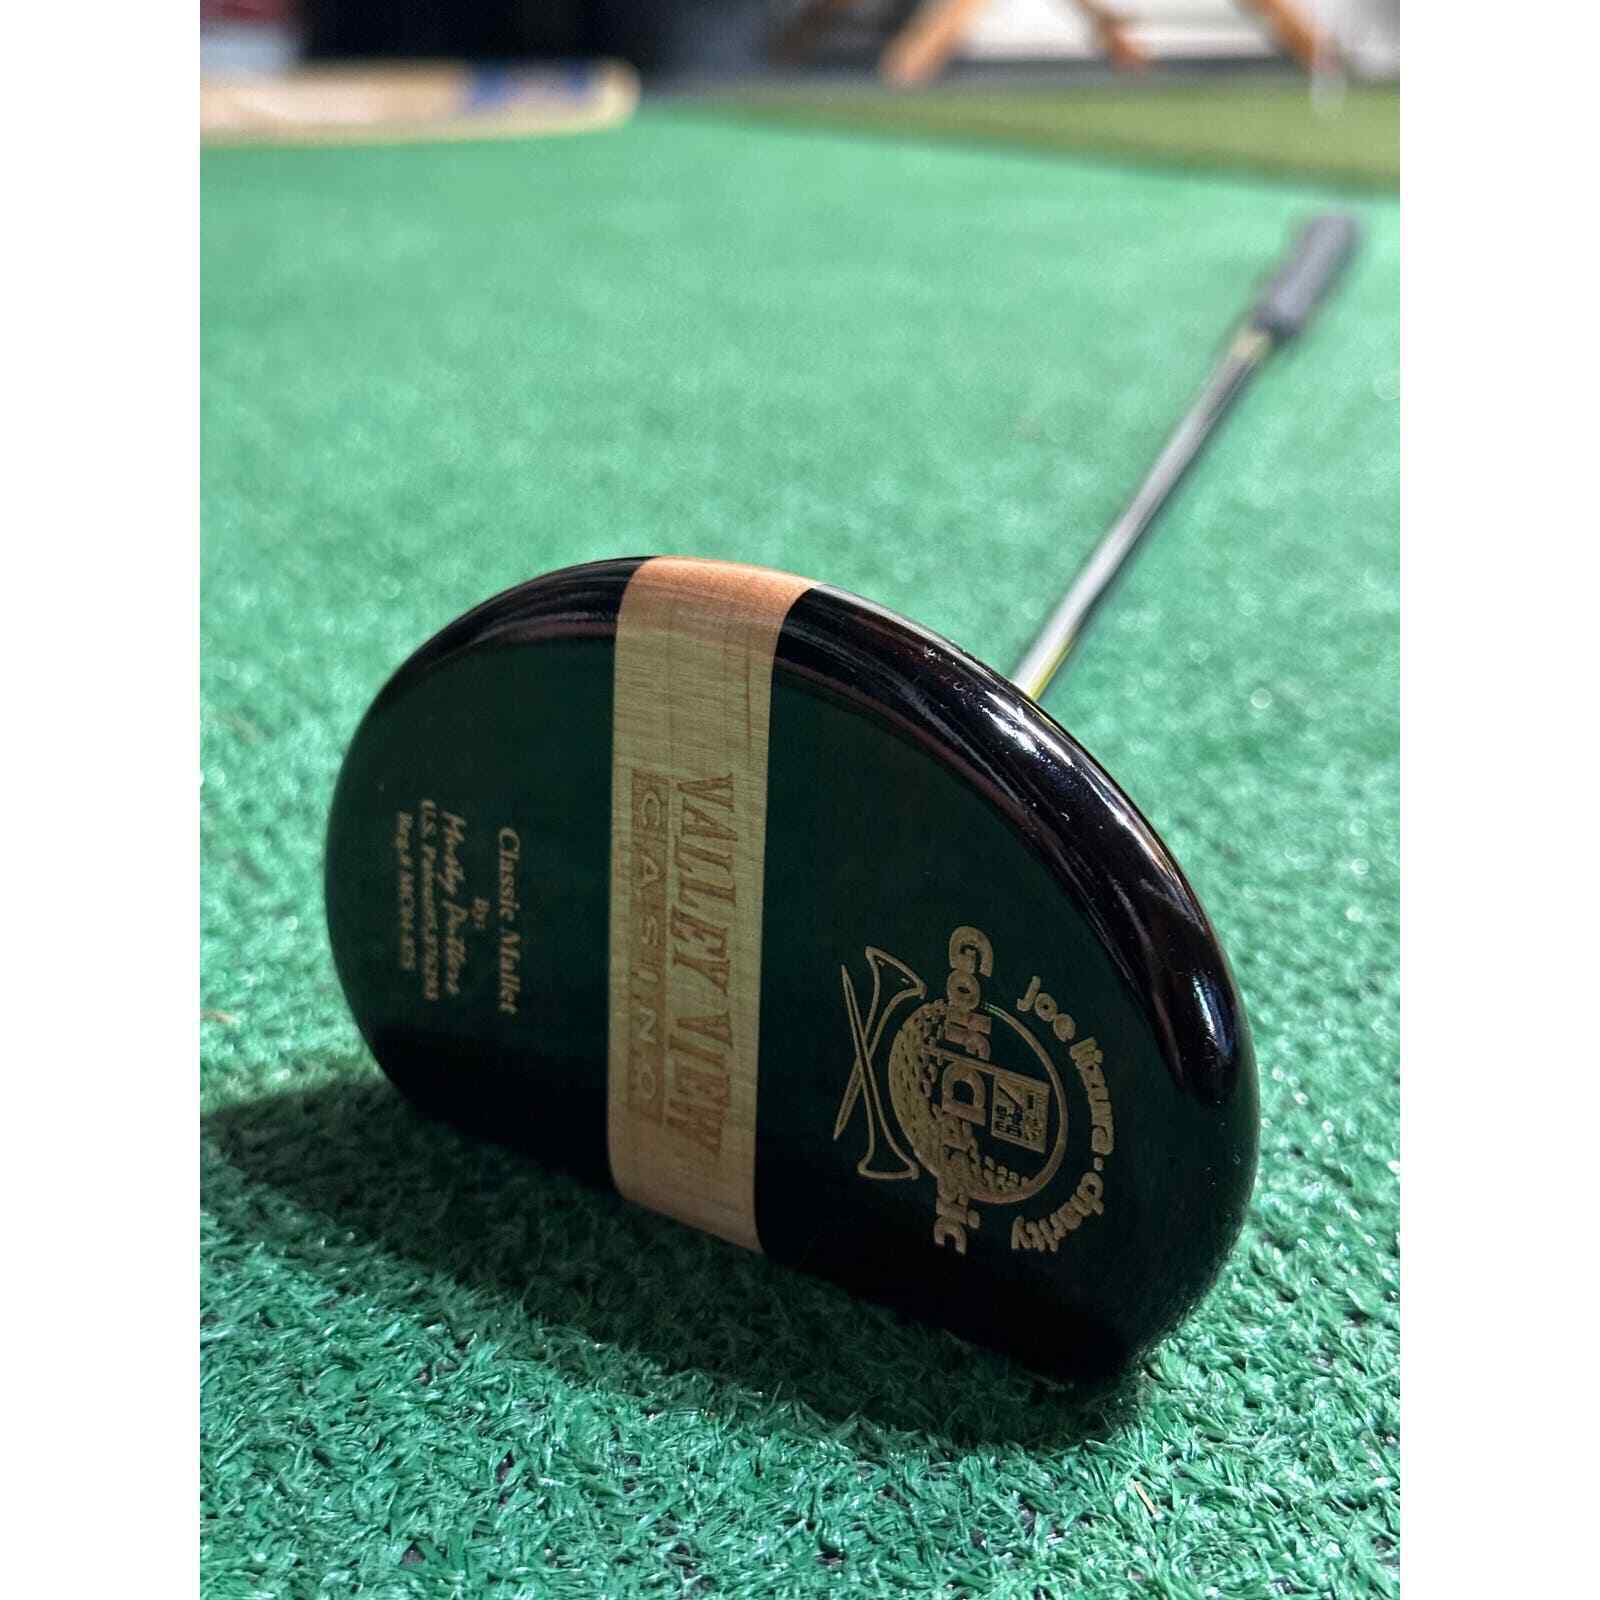 Musty Putter Classic Mallet Wooden Putter w/ Valley View Casino Stamped Logo RH